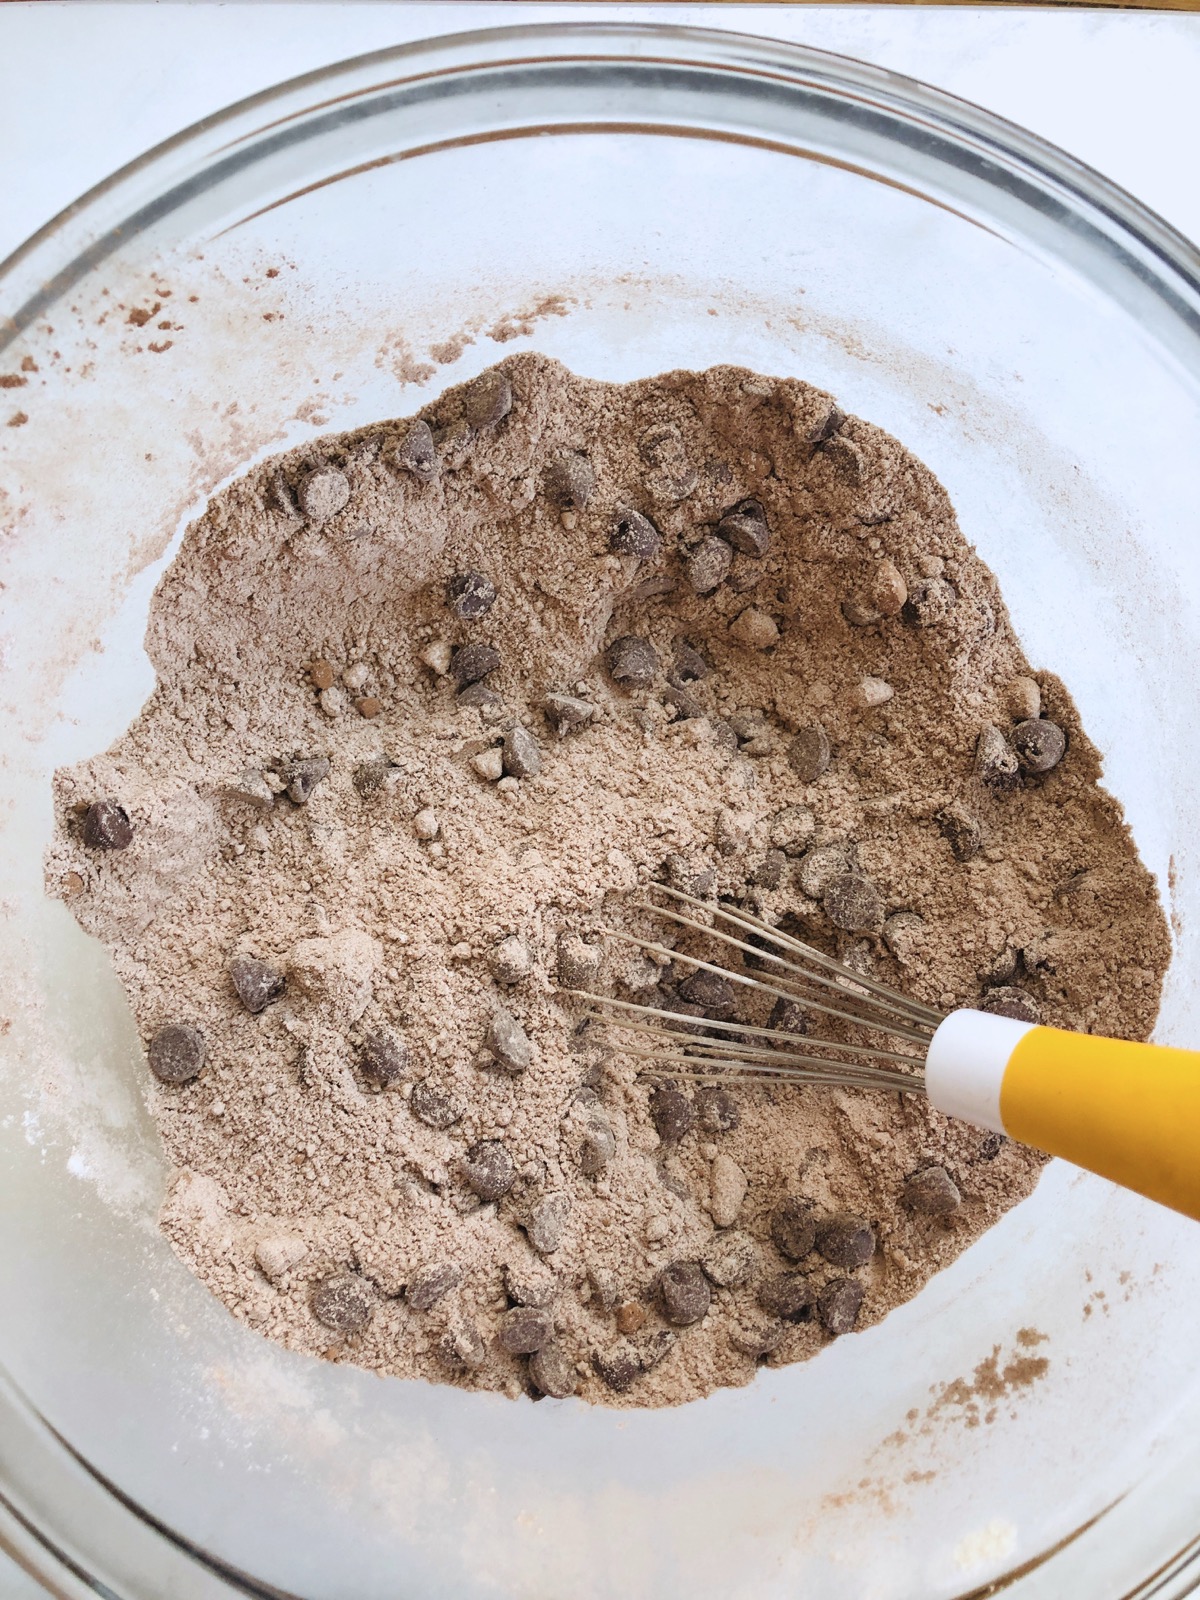 Dry ingredients for chocolate doughnuts whisked together in a mixing bowl.